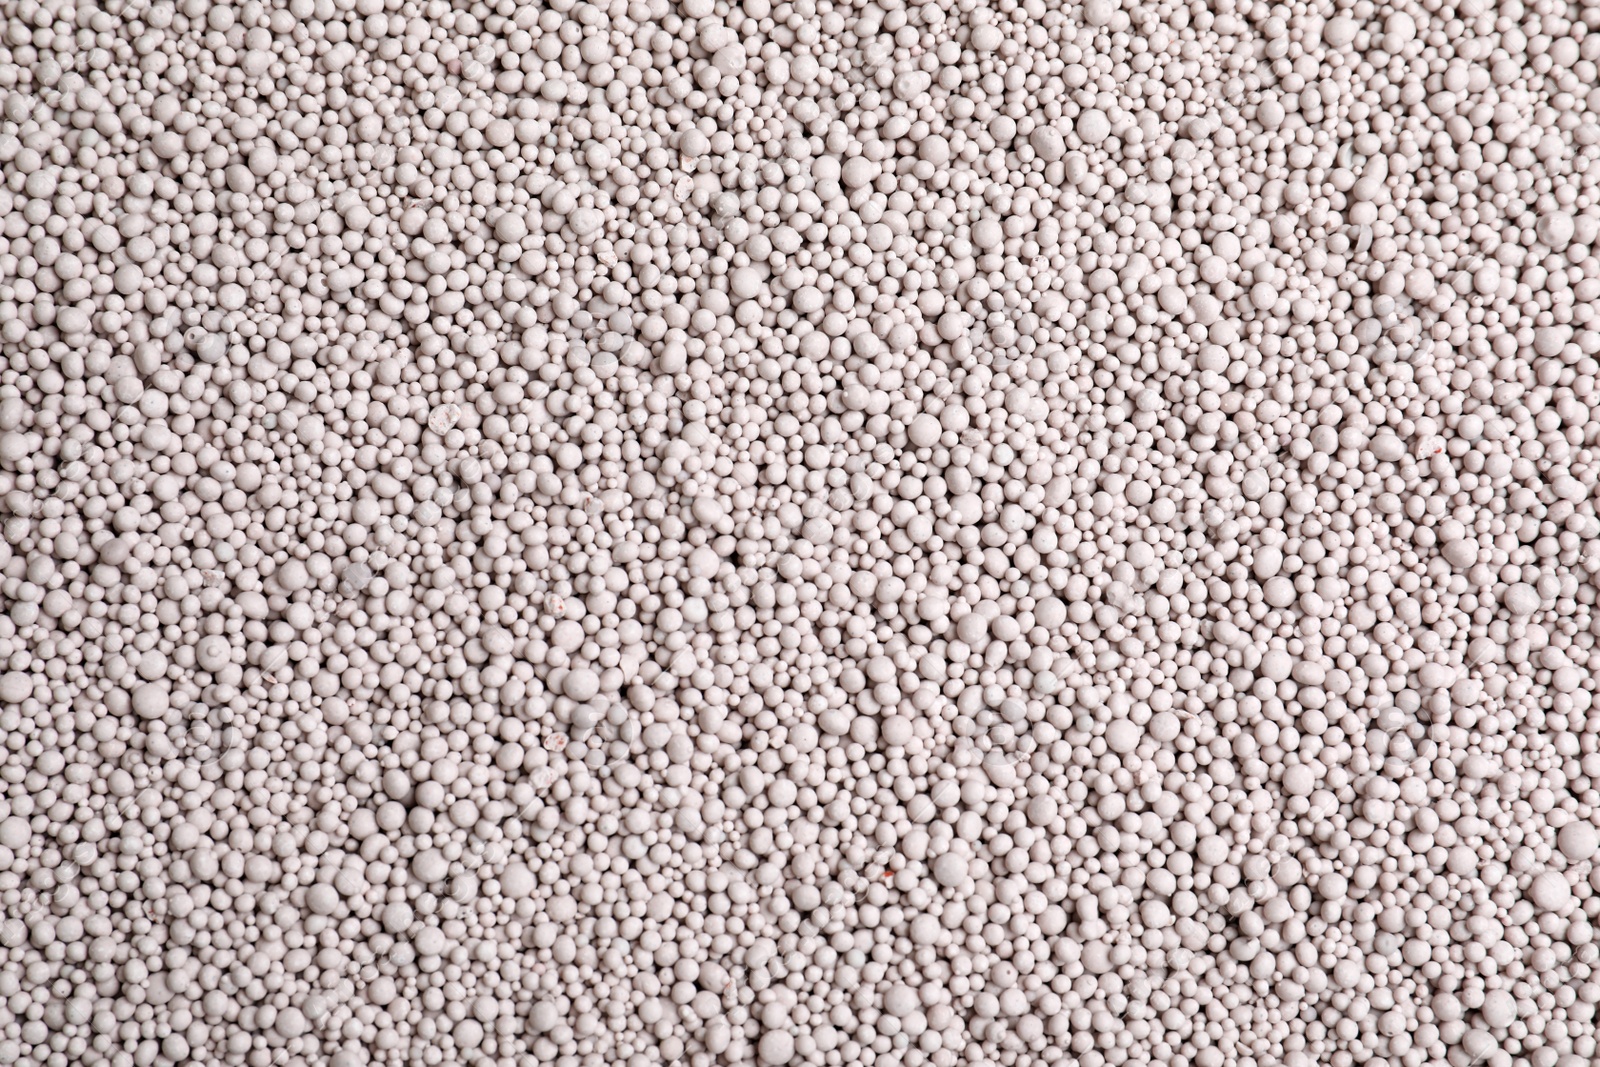 Photo of Textured chemical fertilizer for gardening as background, top view